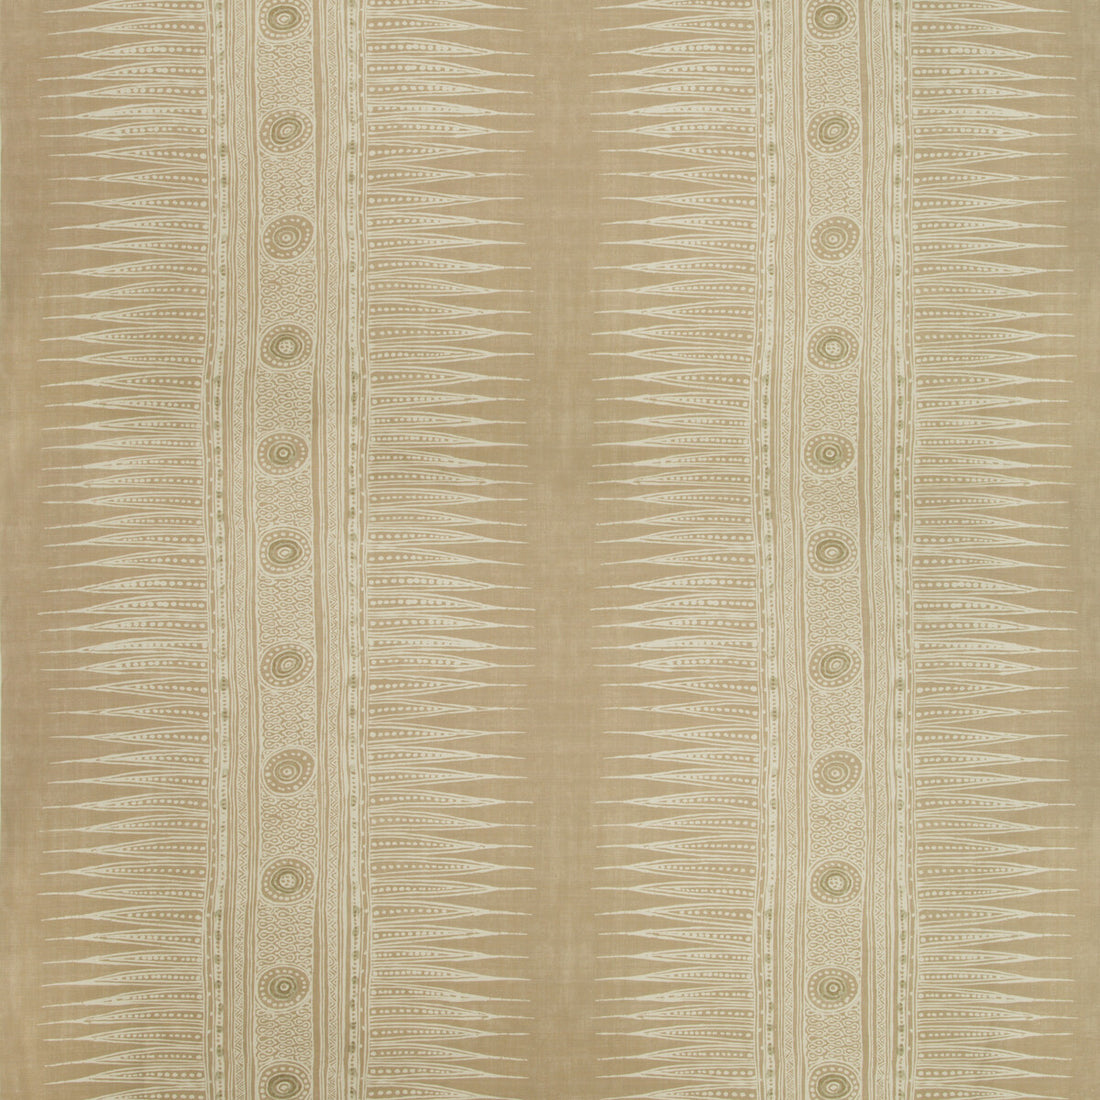 Indian Zag fabric in taupe color - pattern 2010136.106.0 - by Lee Jofa in the Suzanne Rheinstein III collection